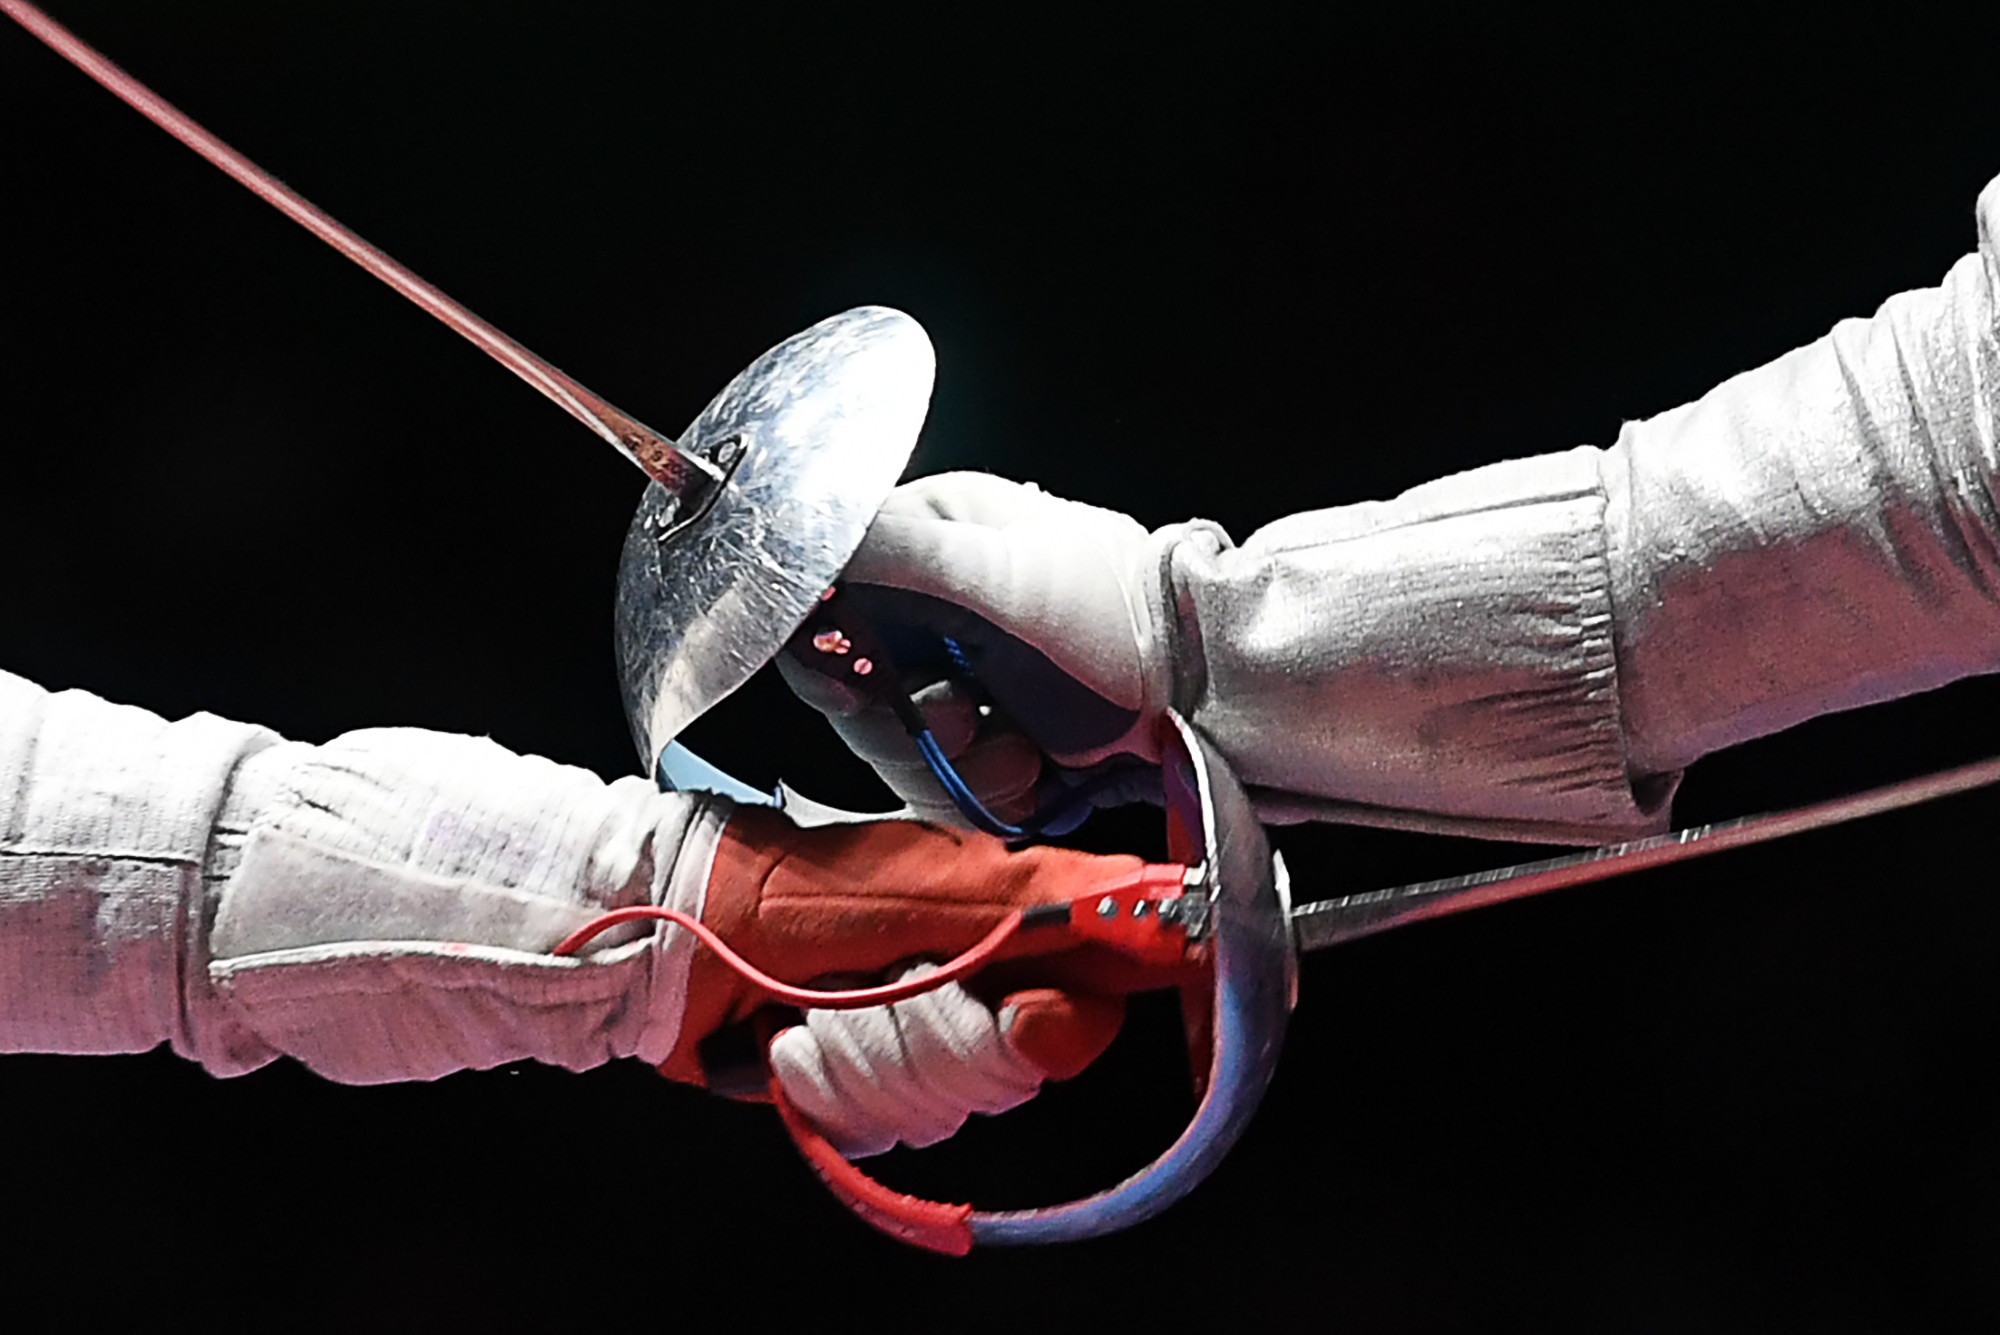 Russian Fencing Federation President Mammadov accuses countries of attempting to bar Russia from EFC